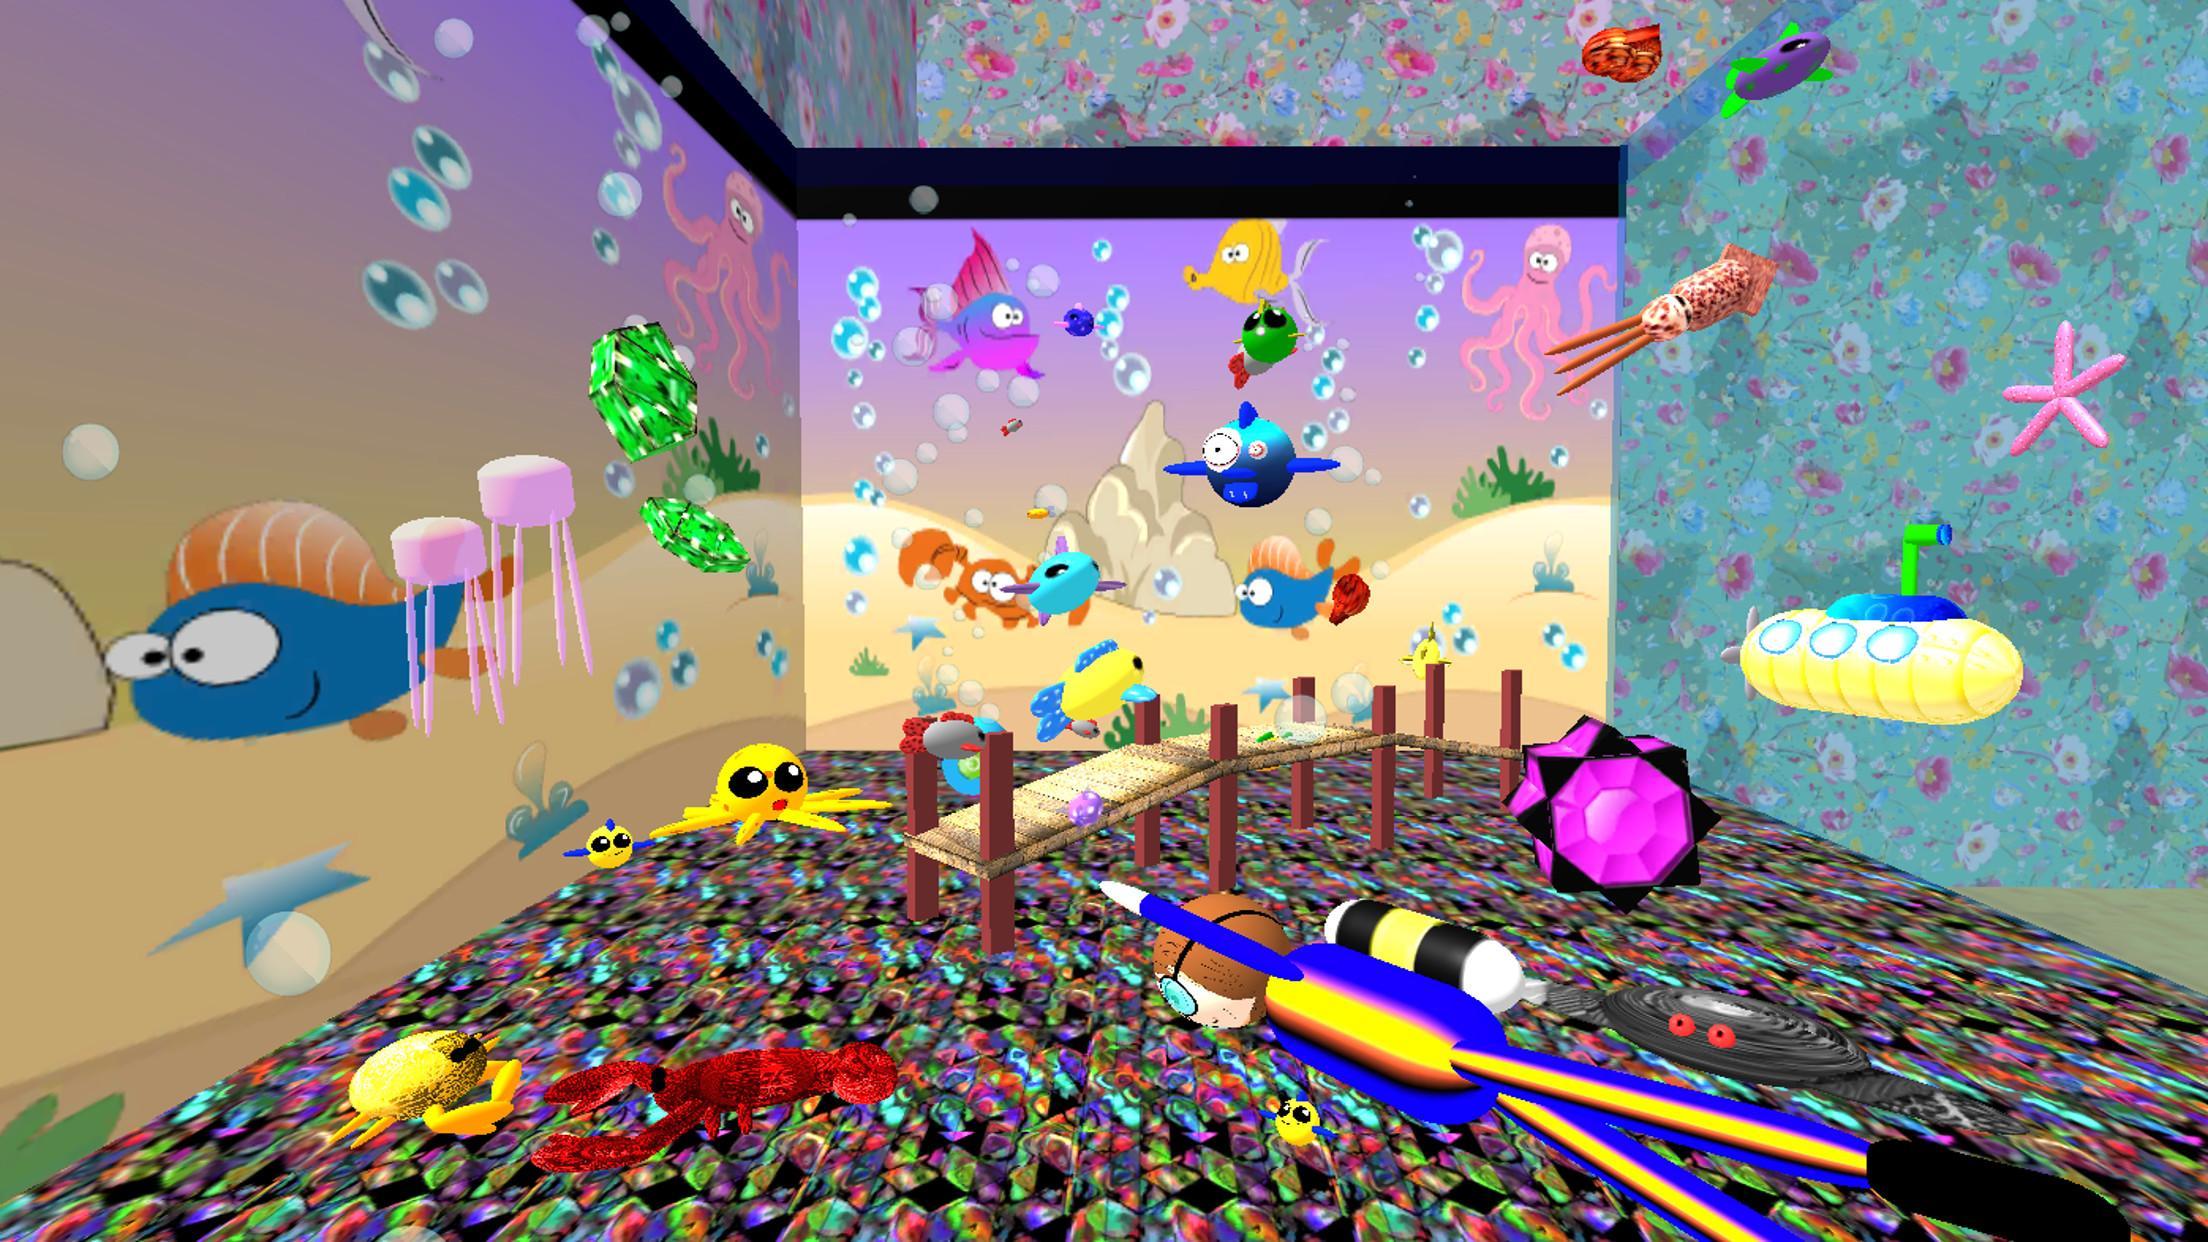 Fish Tank Games for Android - APK Download